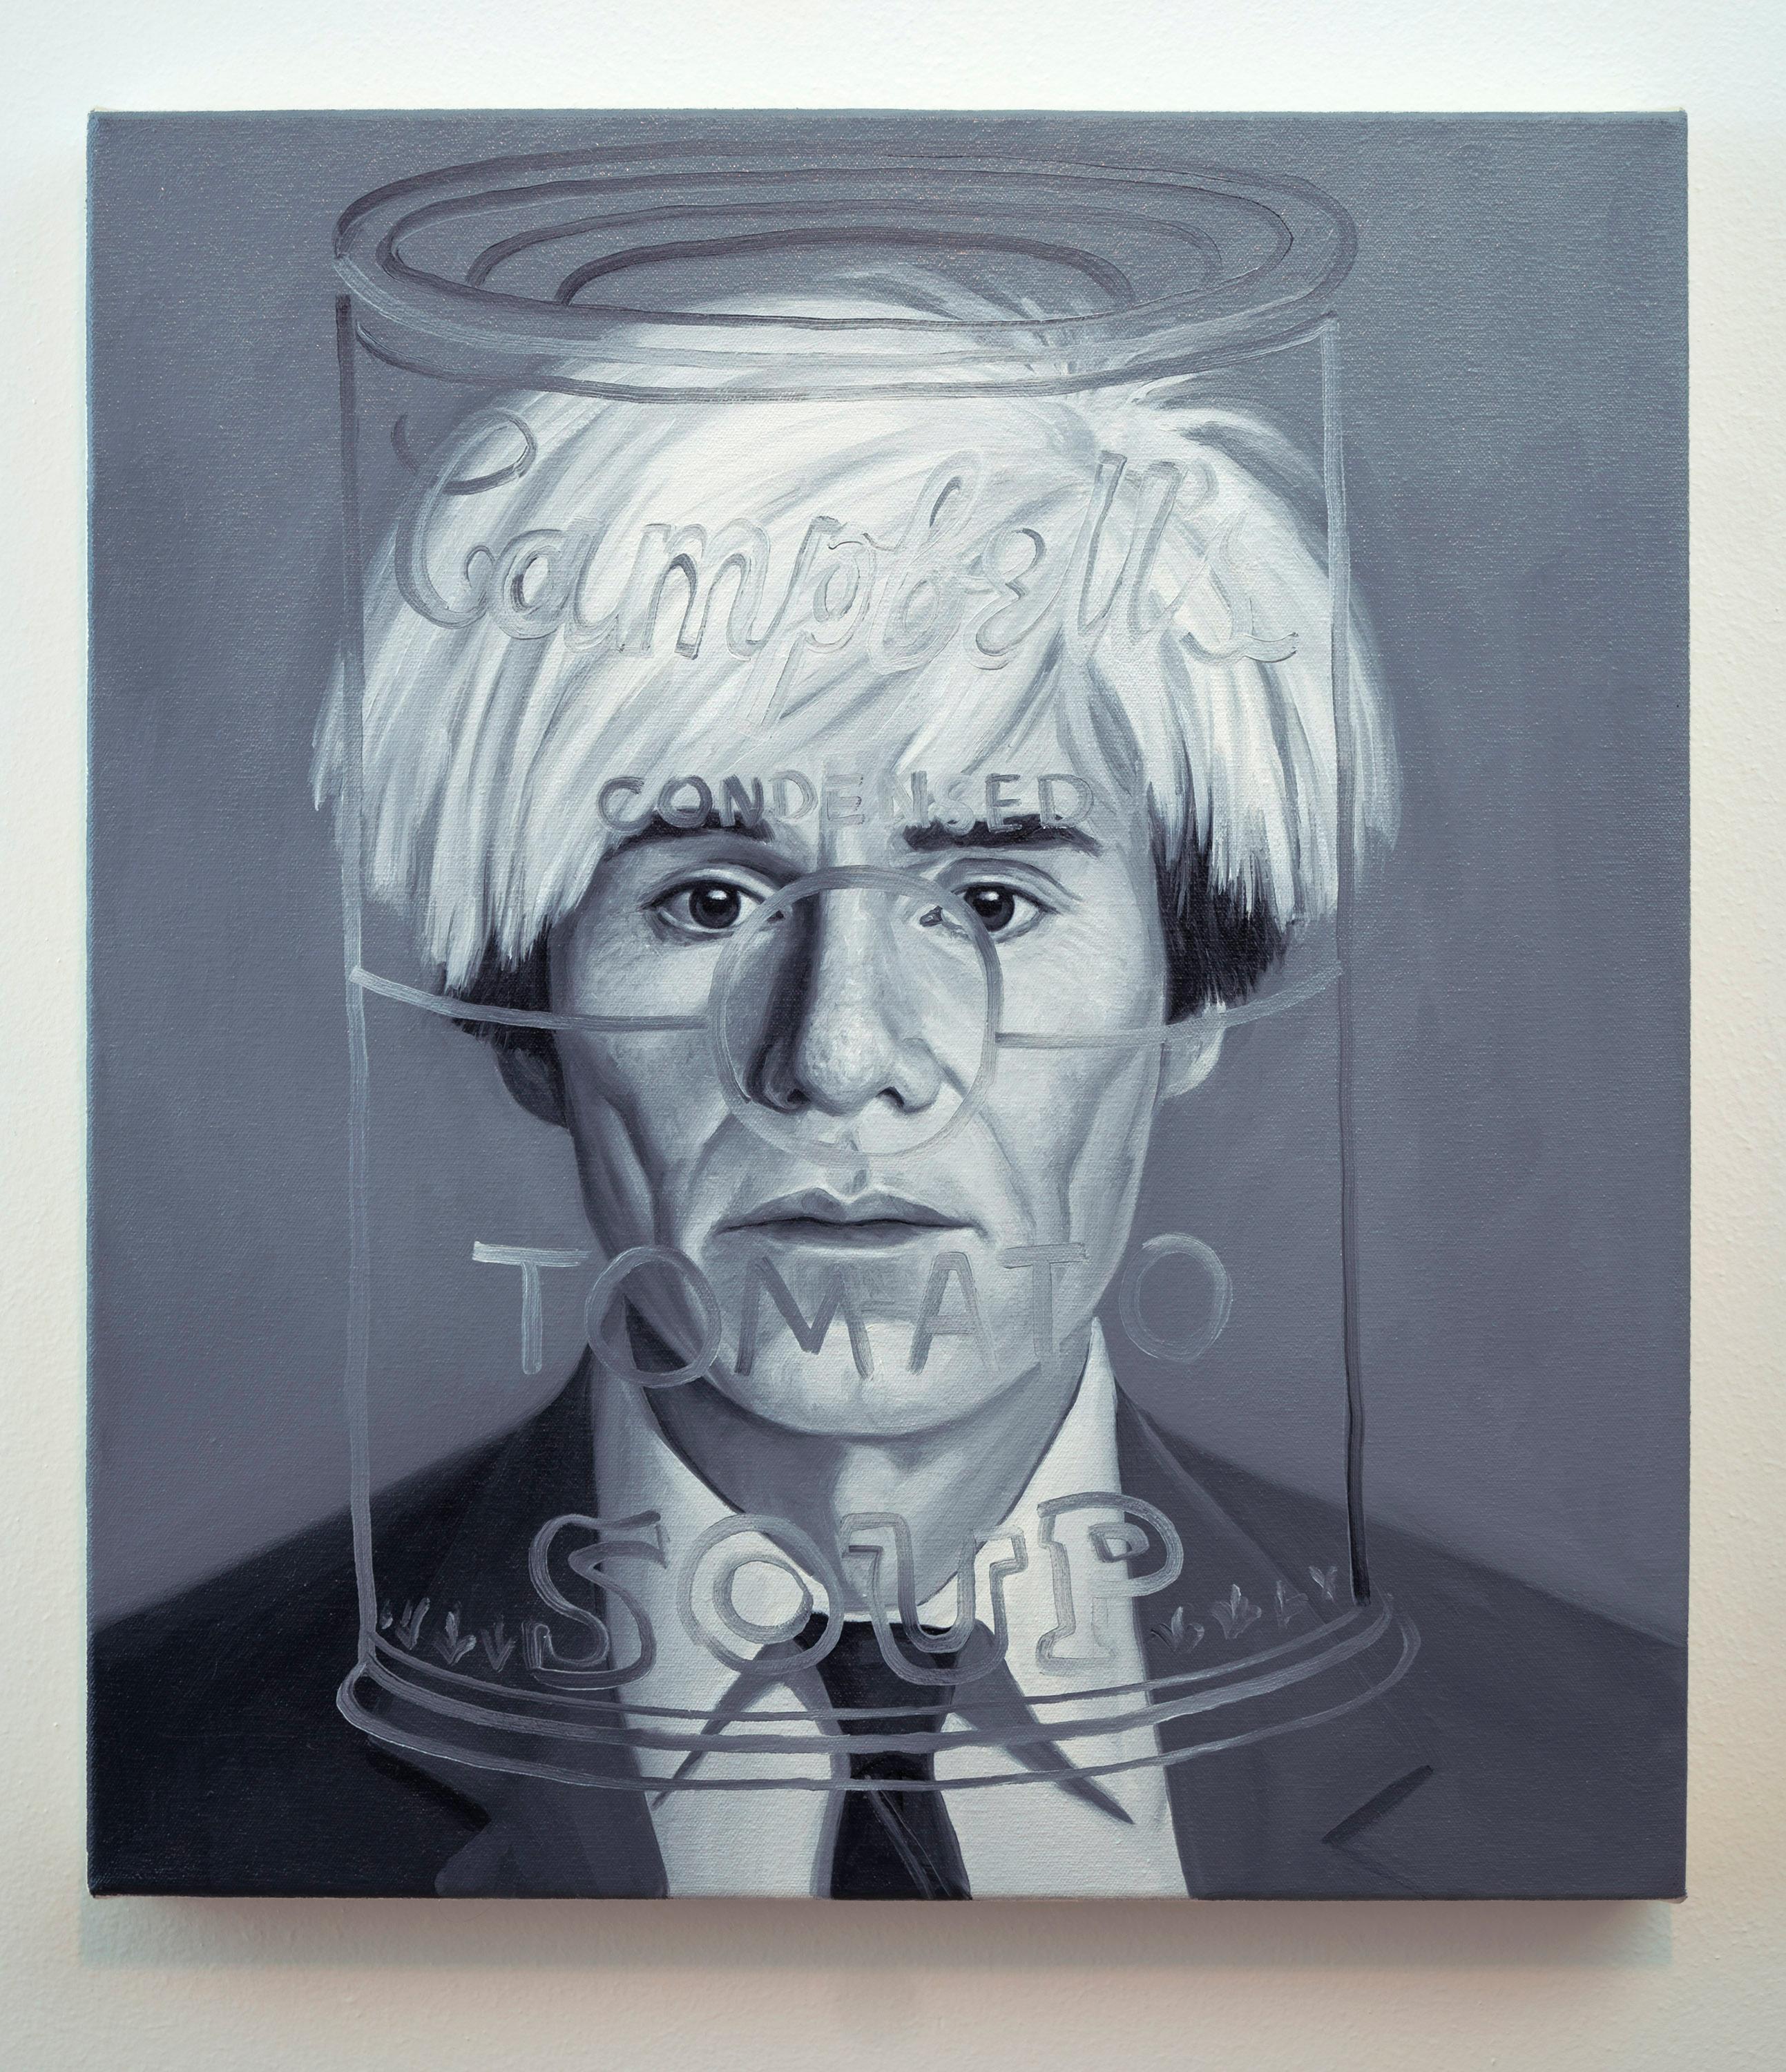 ANDRE VON MORISSE Portrait Painting - Meeting Andy Warhol,  B&W oil on canvas, B& W portrait, grisaille painting